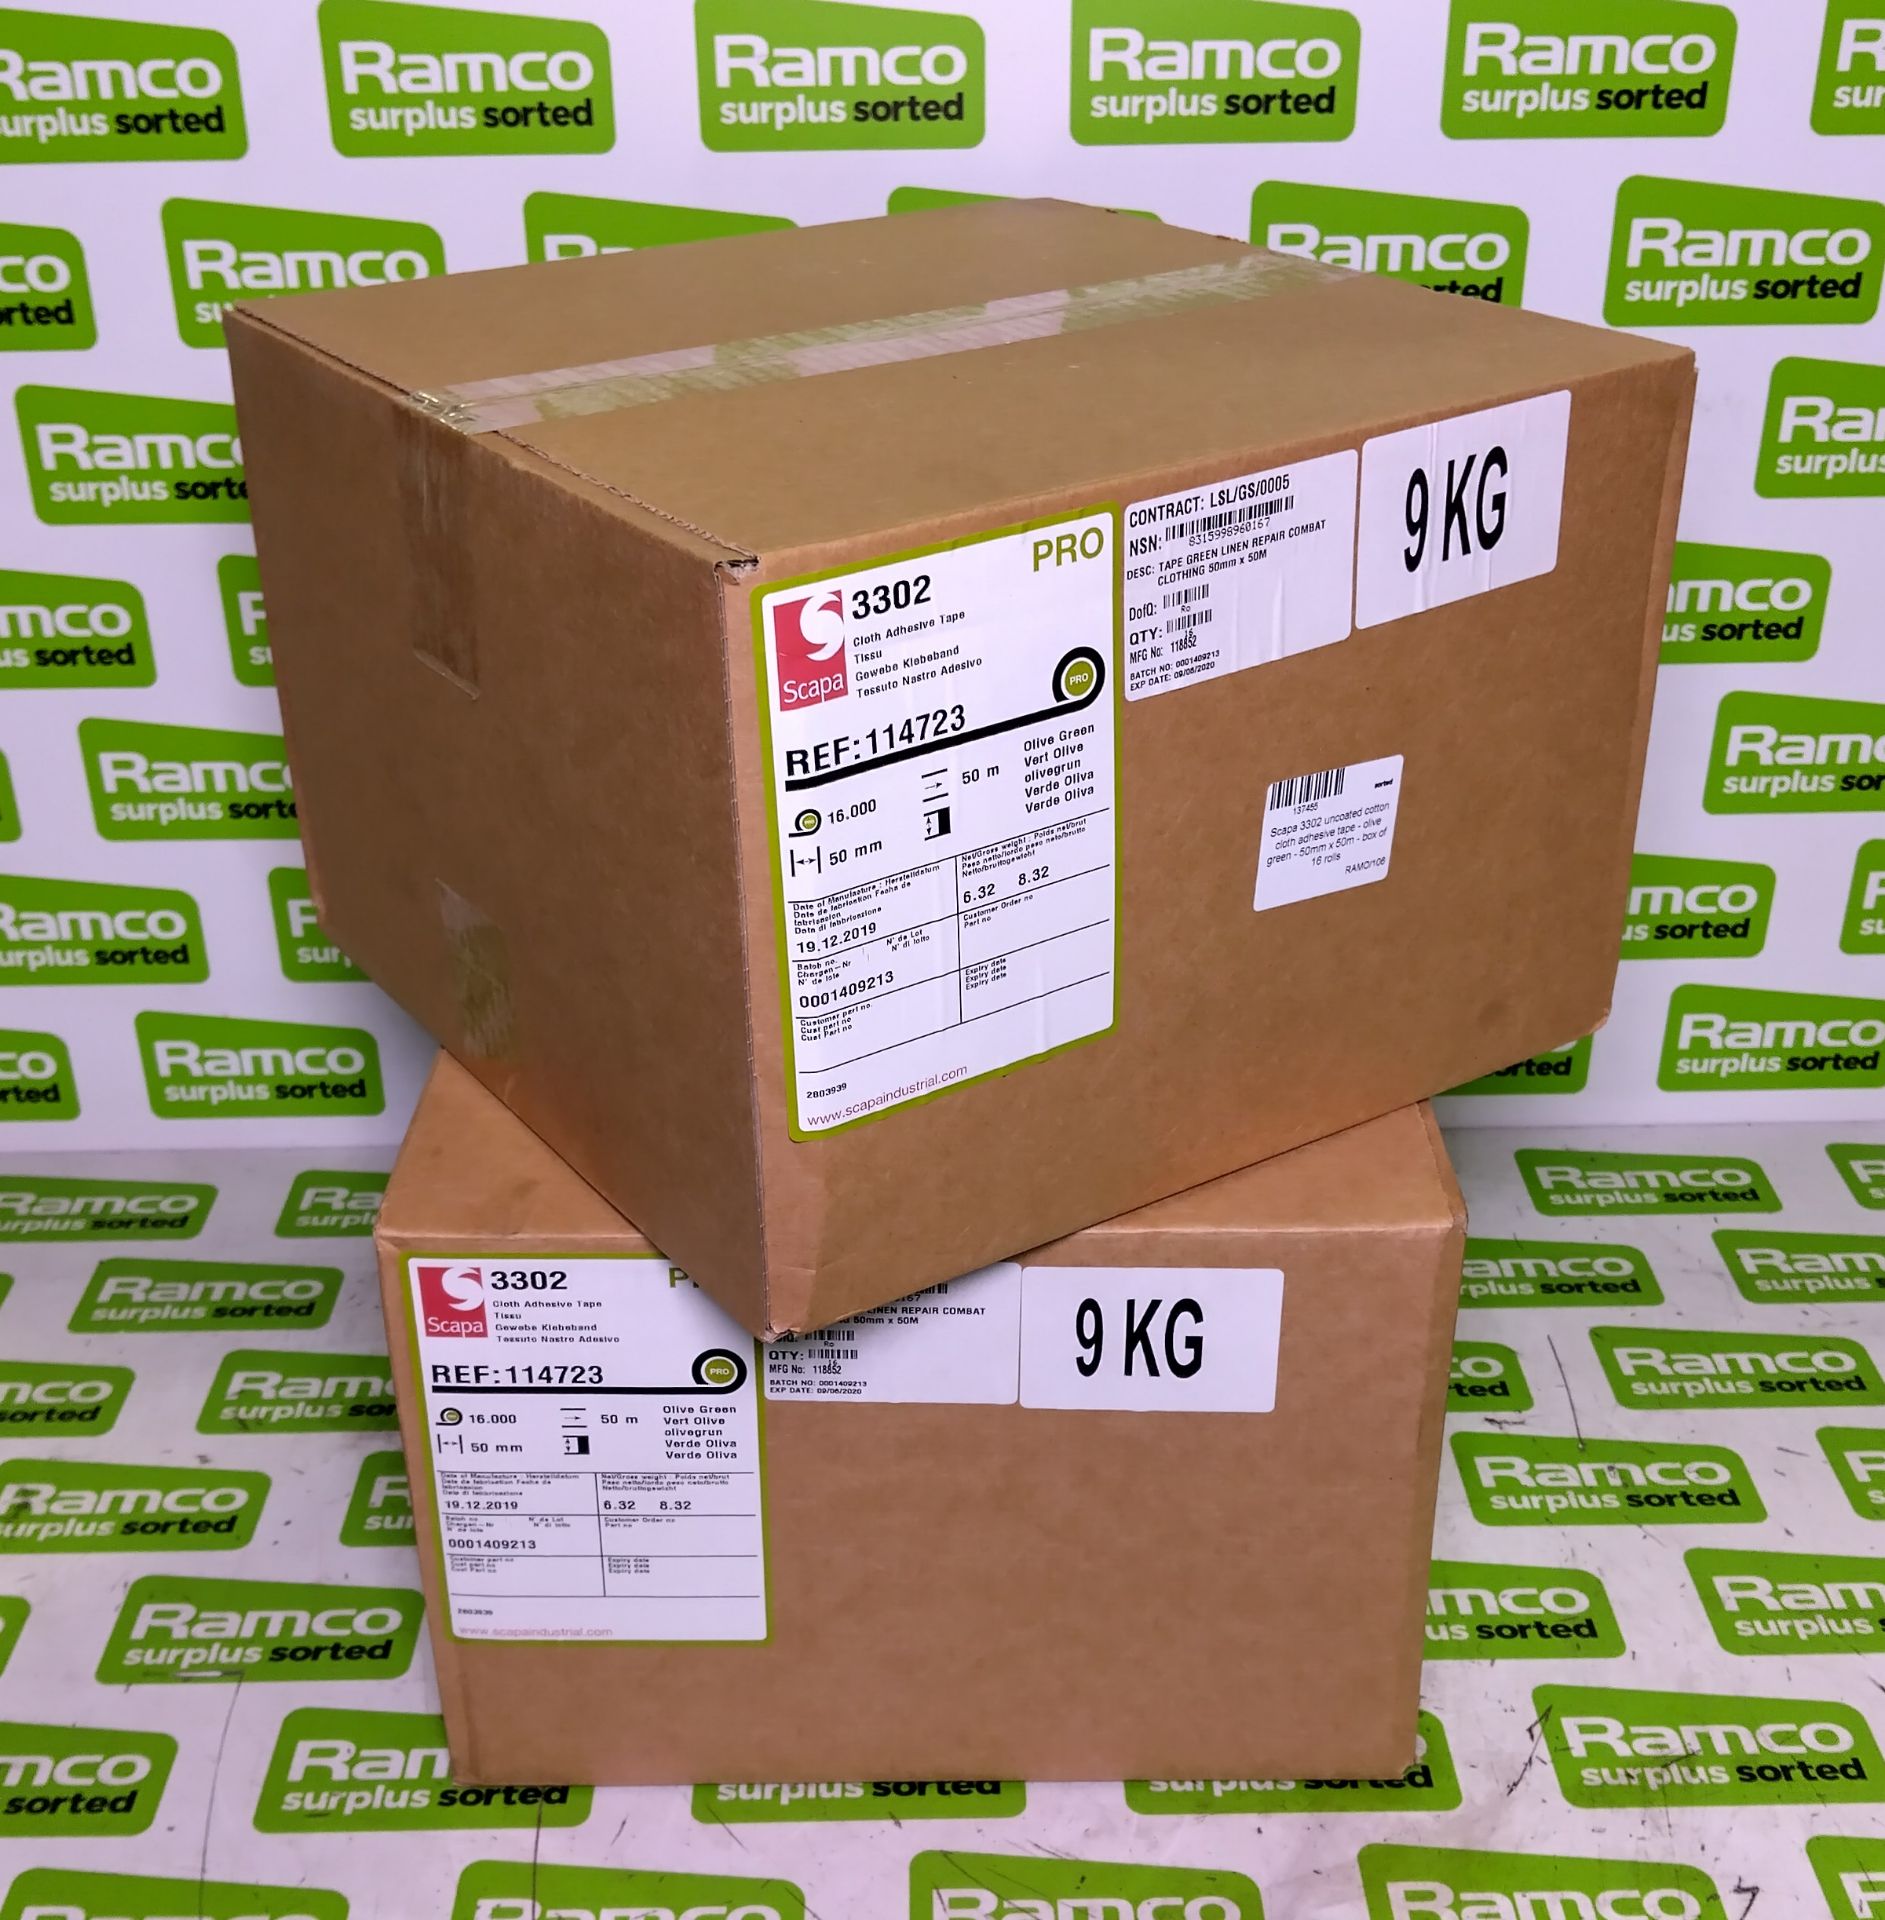 2x boxes of Scapa 3302 uncoated cotton cloth adhesive tape - olive green - 50mm x 50m - 16 per box - Image 3 of 3